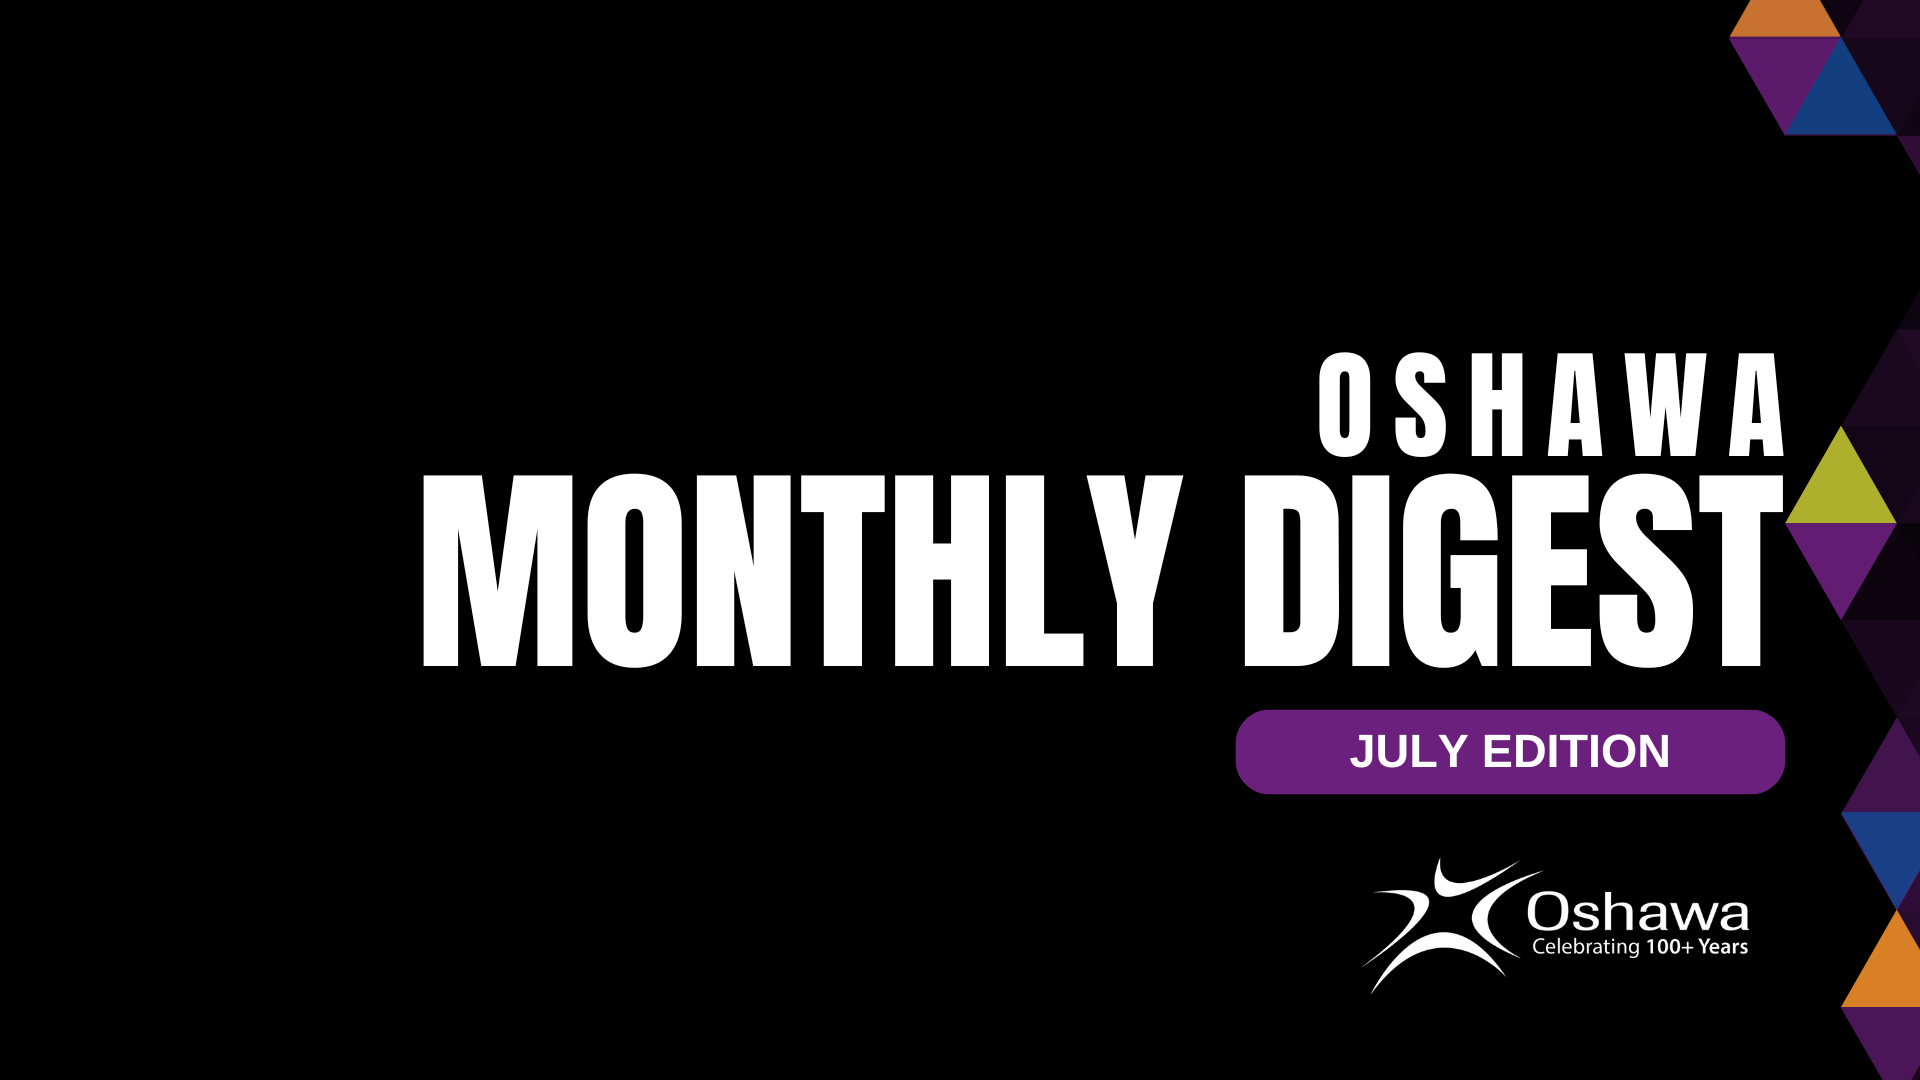 Monthly Digest July Edition